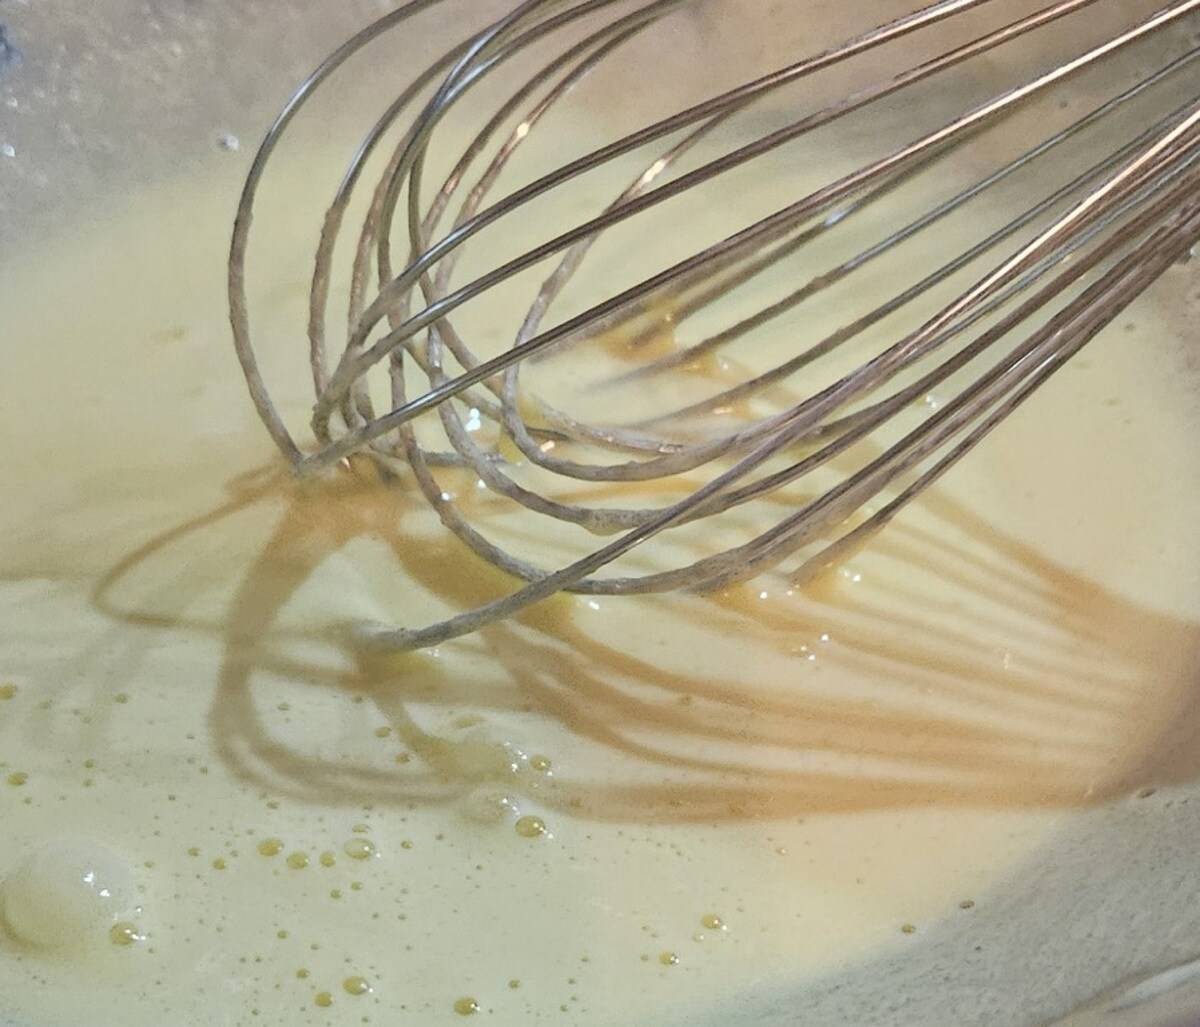 whipping together the cream and yolk mixtures for bourbon sauce